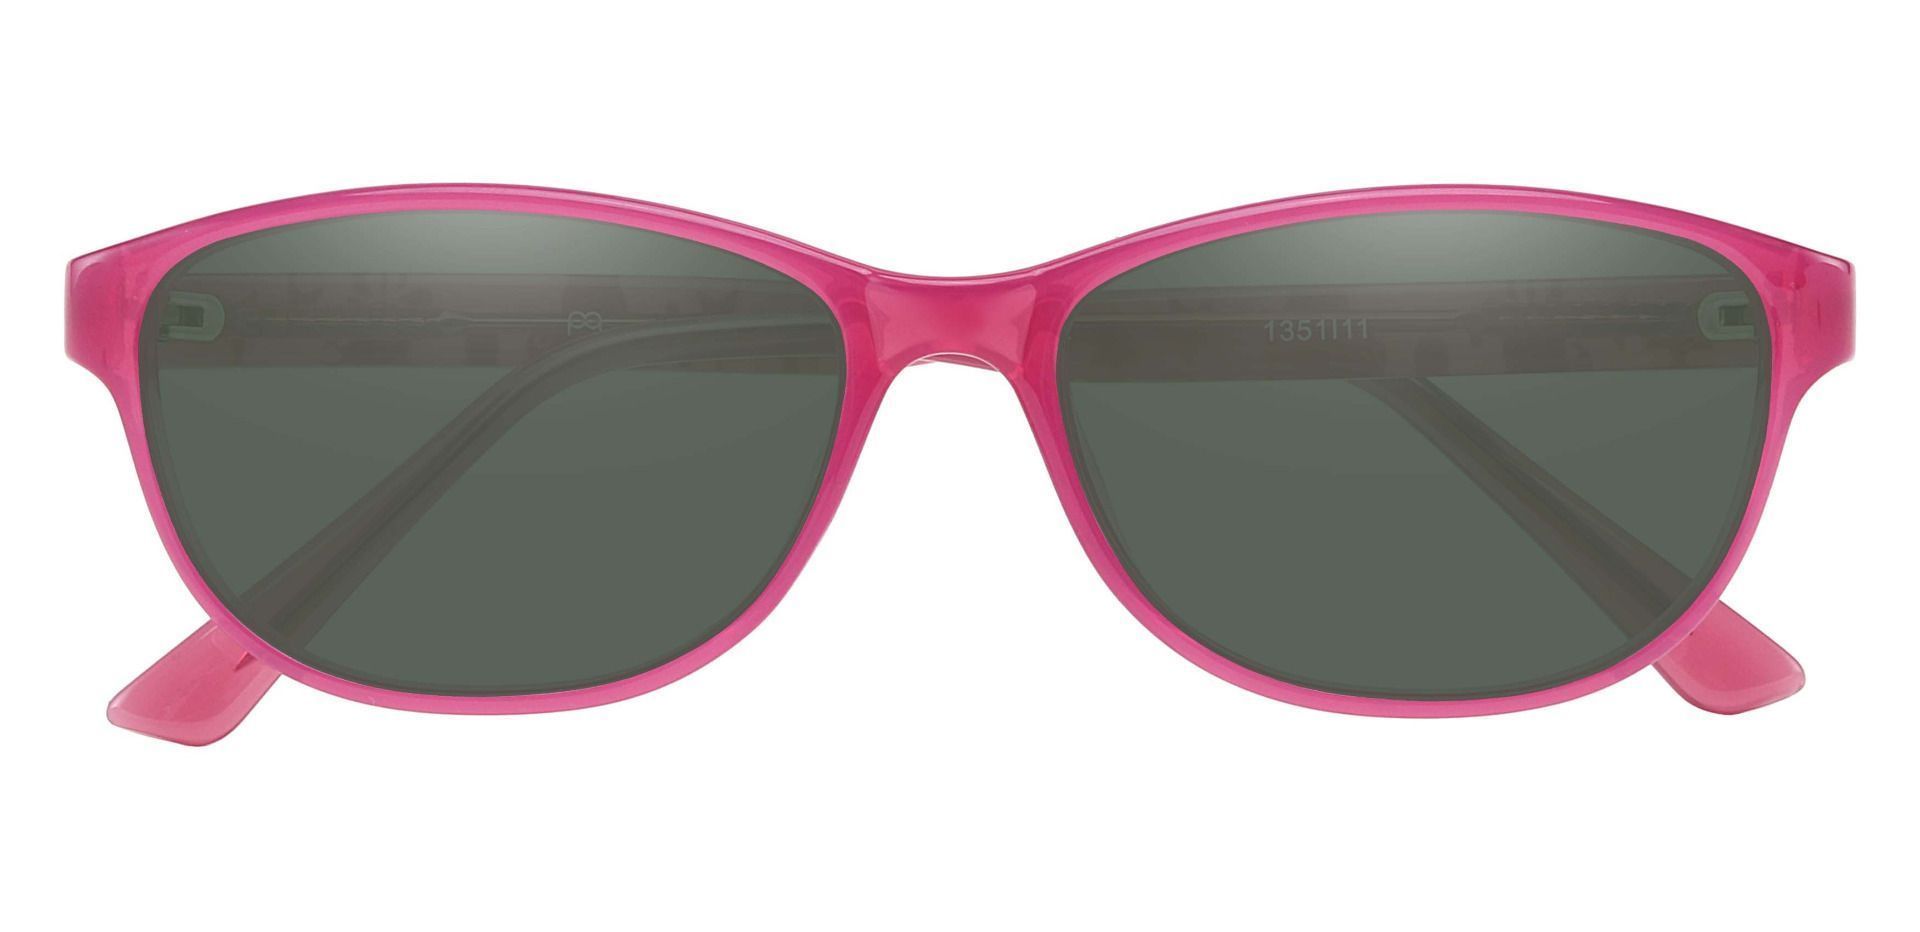 Patsy Oval Prescription Sunglasses - Pink Frame With Green Lenses